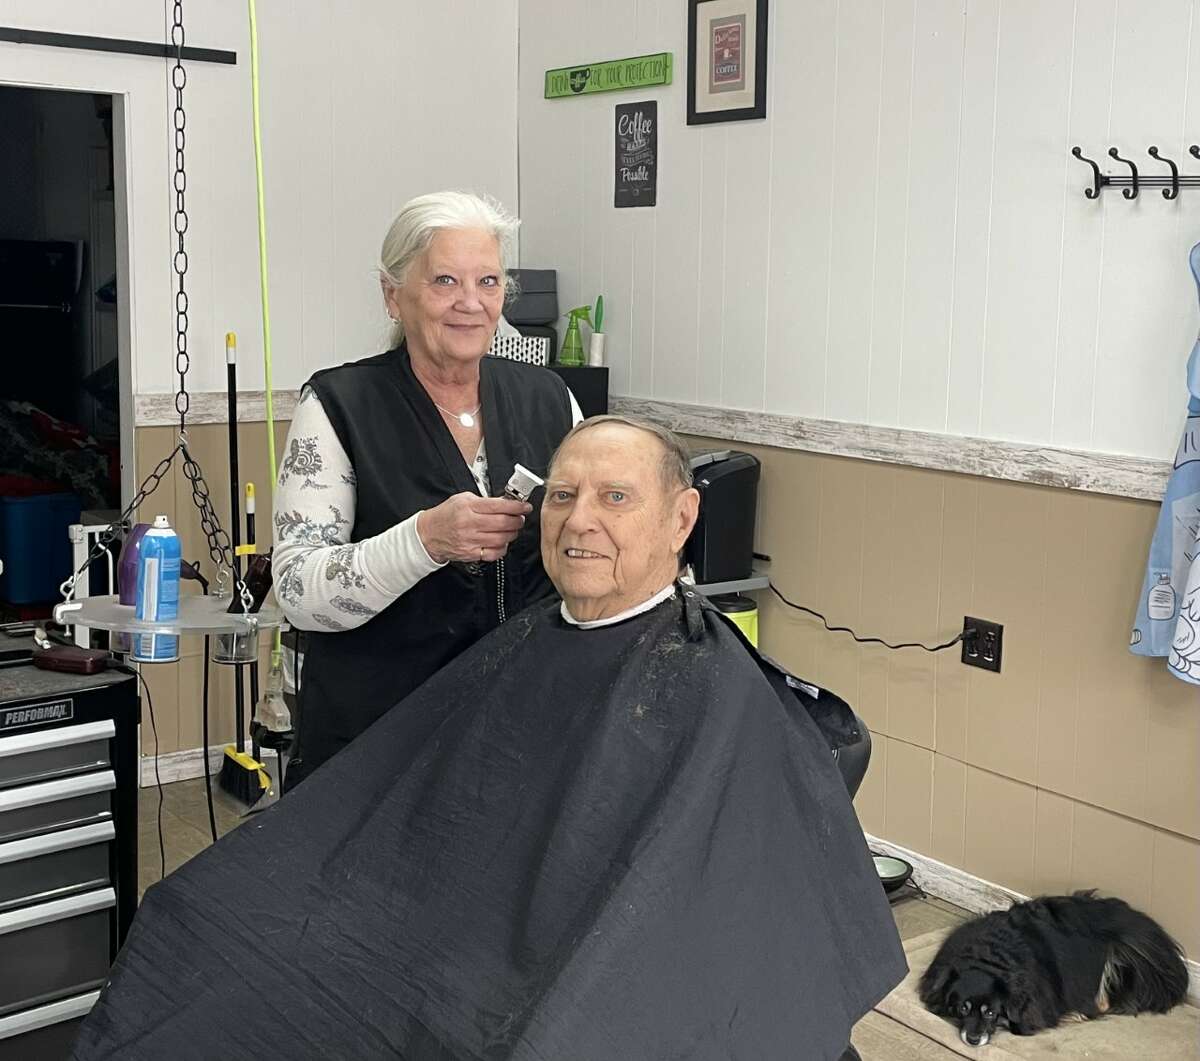 Since arriving in the area, Arthur Schmidt has had his hair cut by Laurie Barnhart at Just Cuts in Lead City. "He will be the star of the party." Barnhart mentioned the New Year's Eve Ball in Reed City.  Mr. Barnhart said he used to get his hair cut at Reed City Hardware, and Mr. Schmidt said he went back and forth to many barbershops.  "It's been five or six years since Arthur came to me then." She said she was probably the only one within a 15 mile radius.  